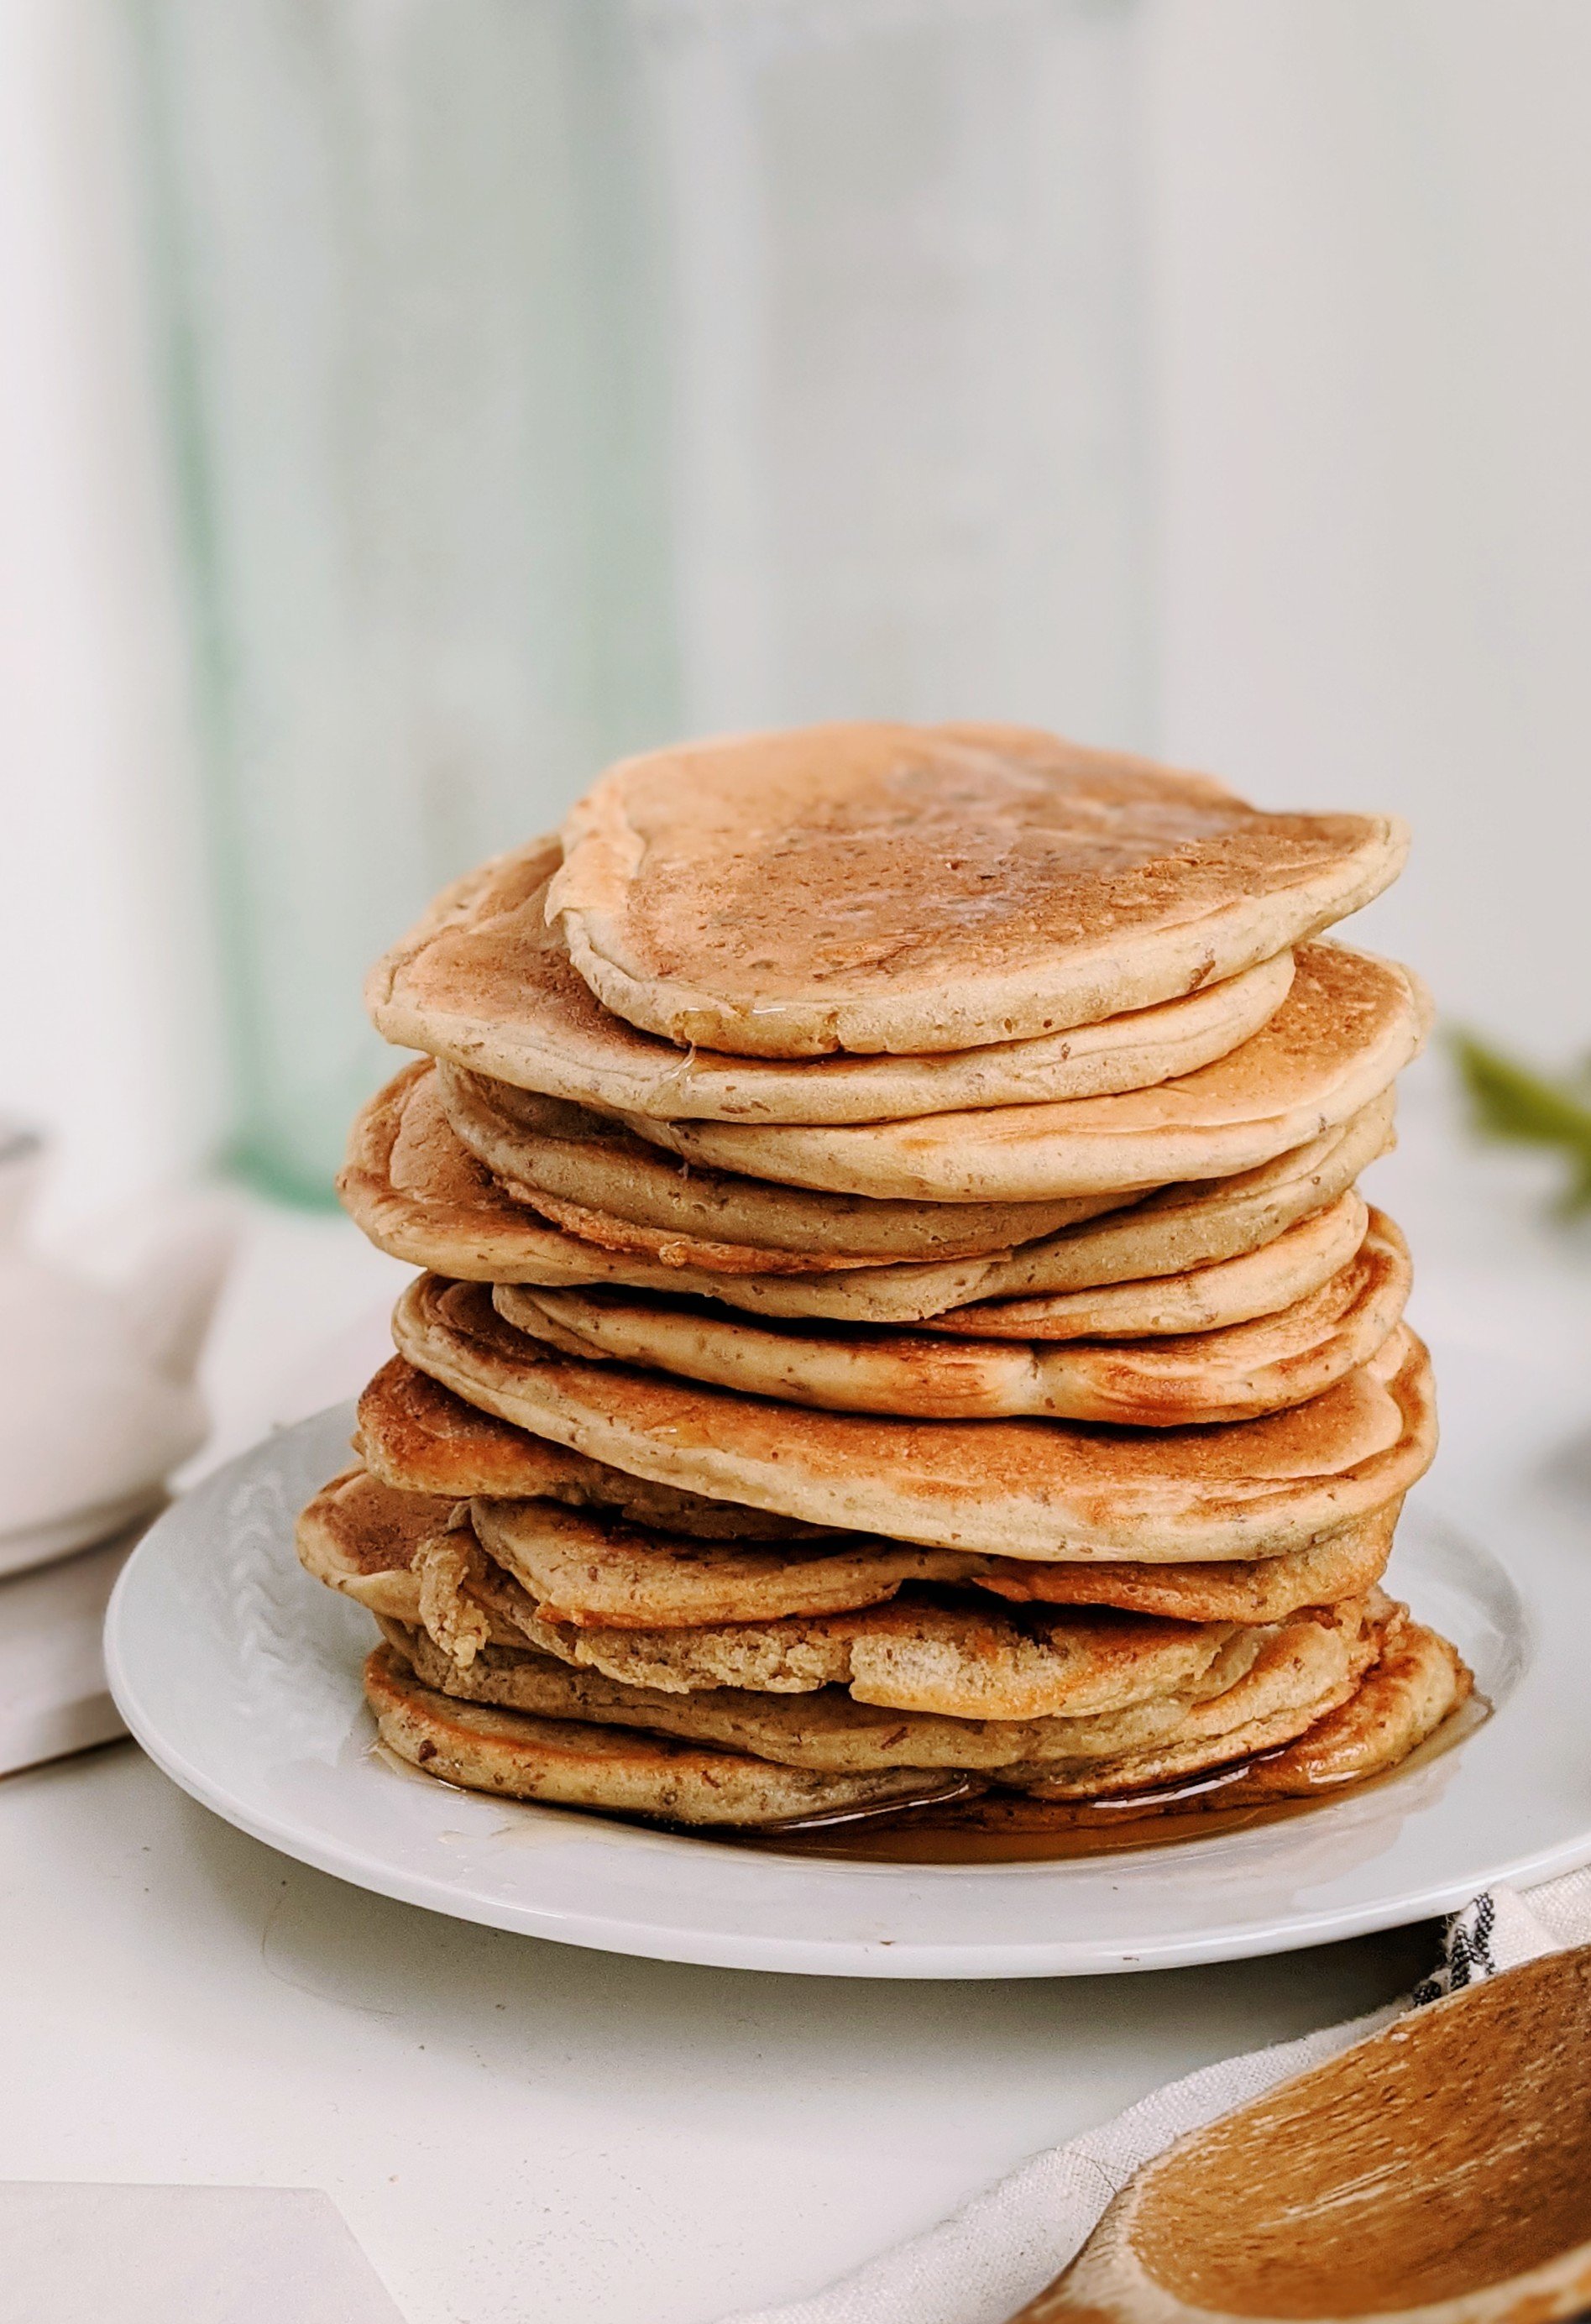 sourdough starter pancakes recipe vegan dairy free eggless recipe non dairy pancakes stacked for brunch or breakfast recipes healthy for guests company make ahead breakfasts with sourdough baking castoff 